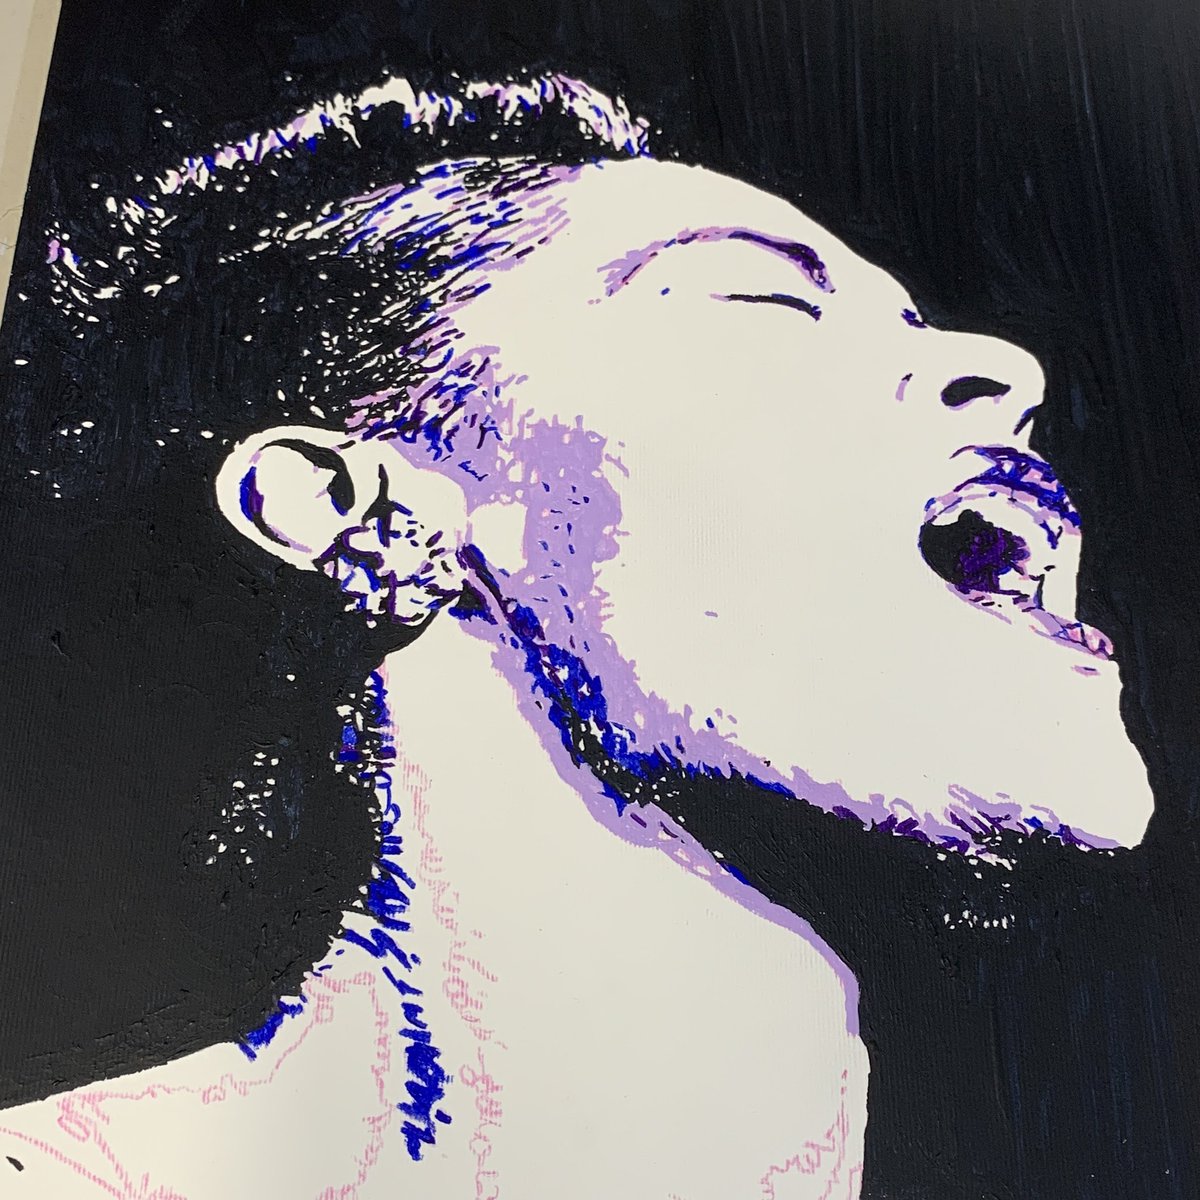 #WIP Wednesday - a bit more progress on this #portrait of #BillieHoliday #music #jazz #art #colourblind #colorblind